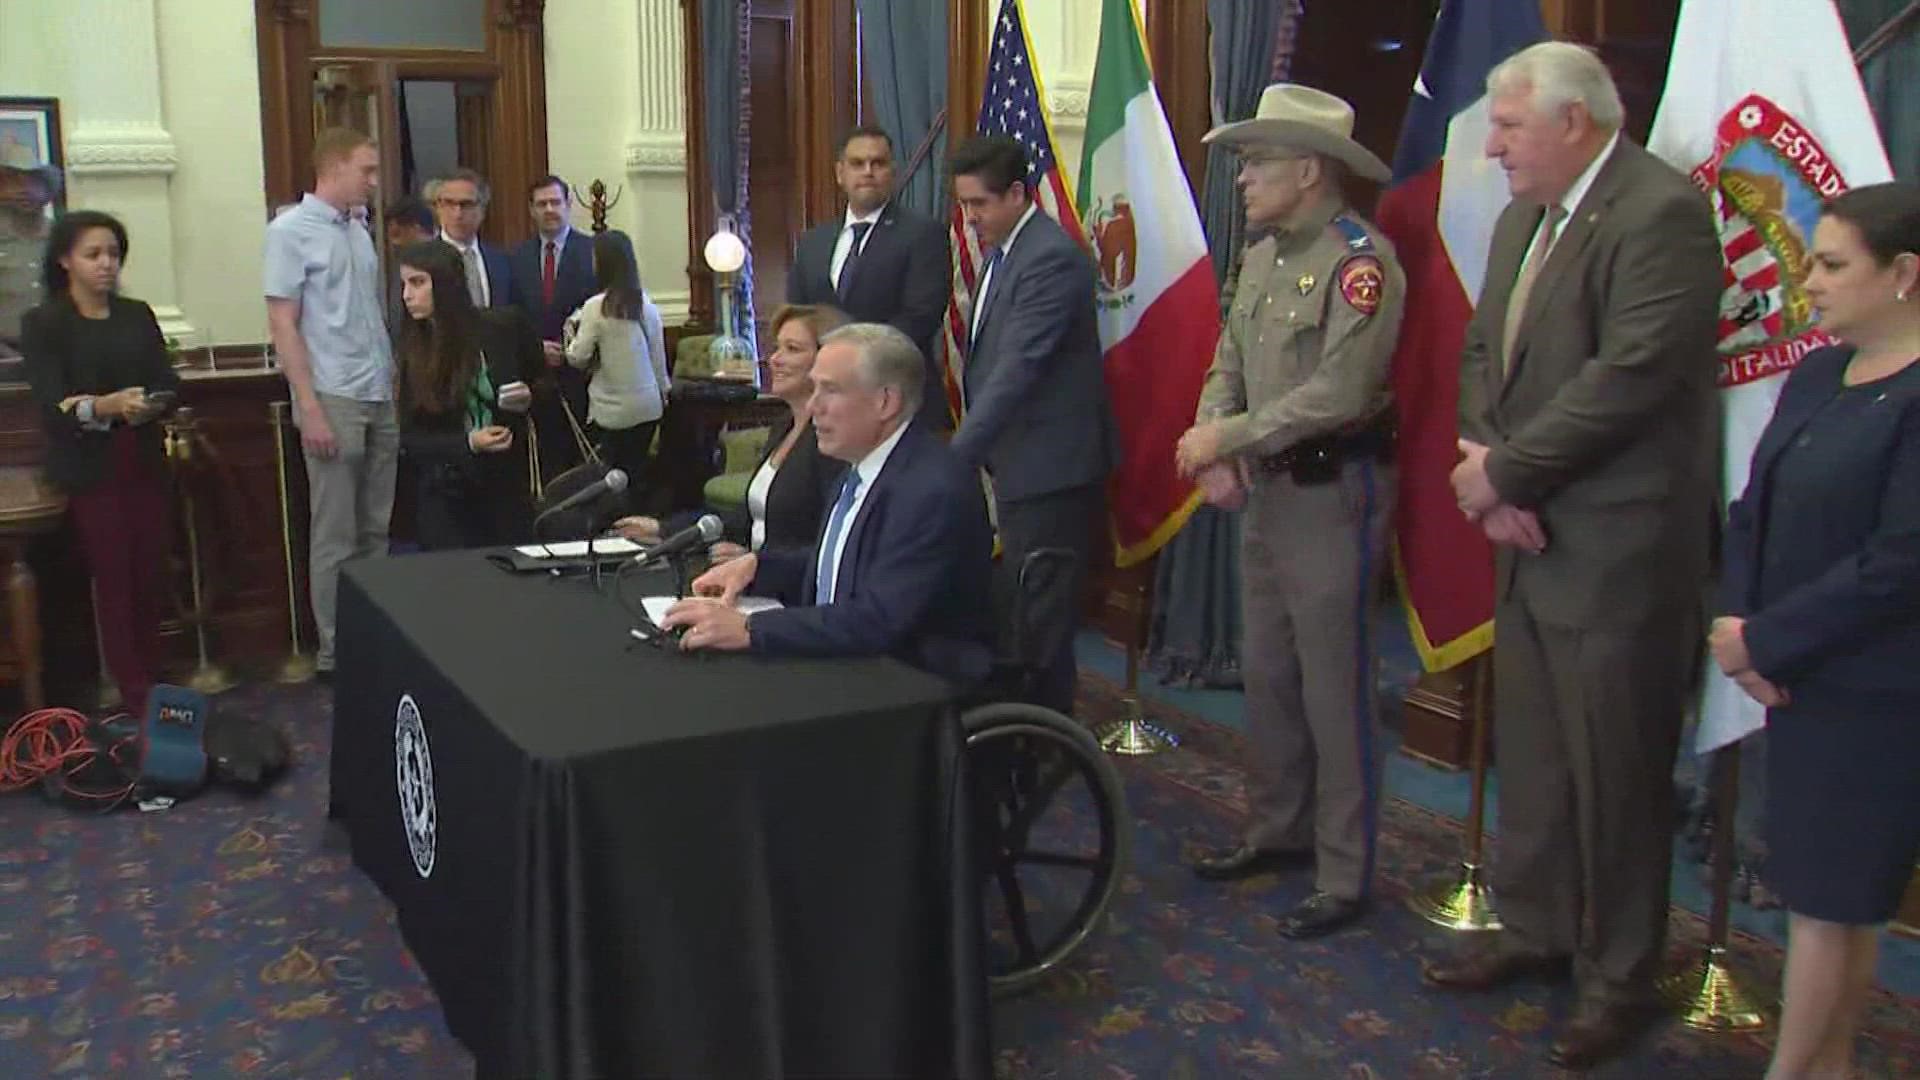 Gov. Abbott announced Thursday he is easing state inspections at the Chihuahua, Mexico border after coming to an agreement with the city's governor.